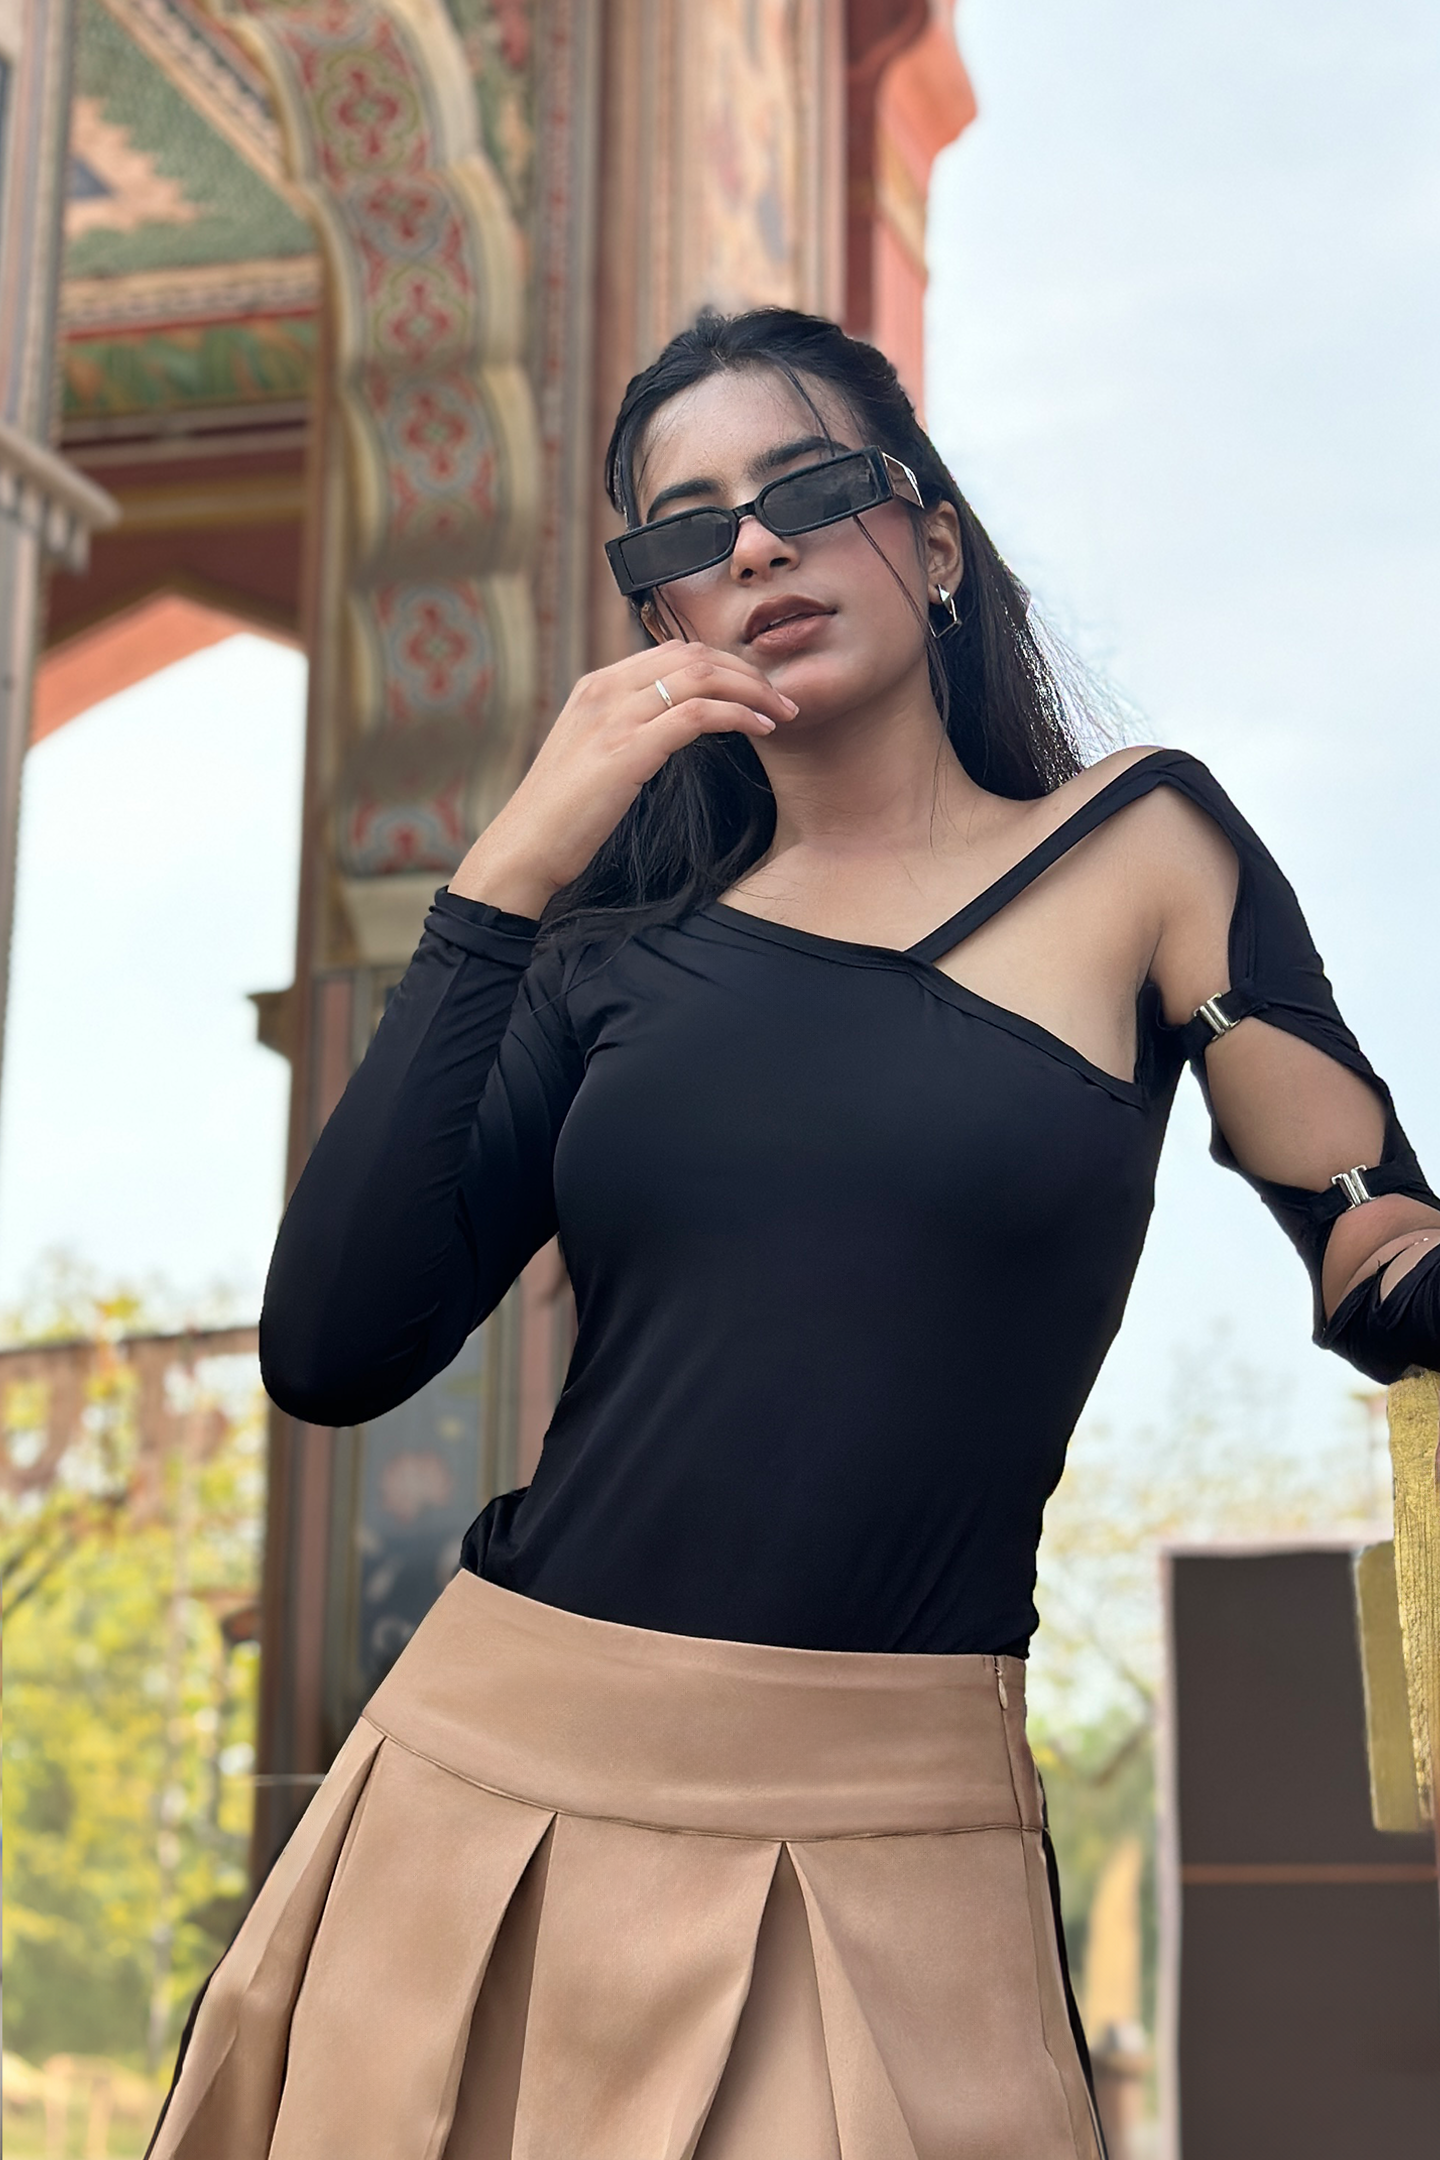 Ronazen black cut-out top, featuring elegant cut-out details along the shoulders and sides. The top is fitted, showcasing a contemporary and stylish design. The background is neutral, emphasizing the chic and versatile appeal of the garment, perfect for fashion-forward wardrobes